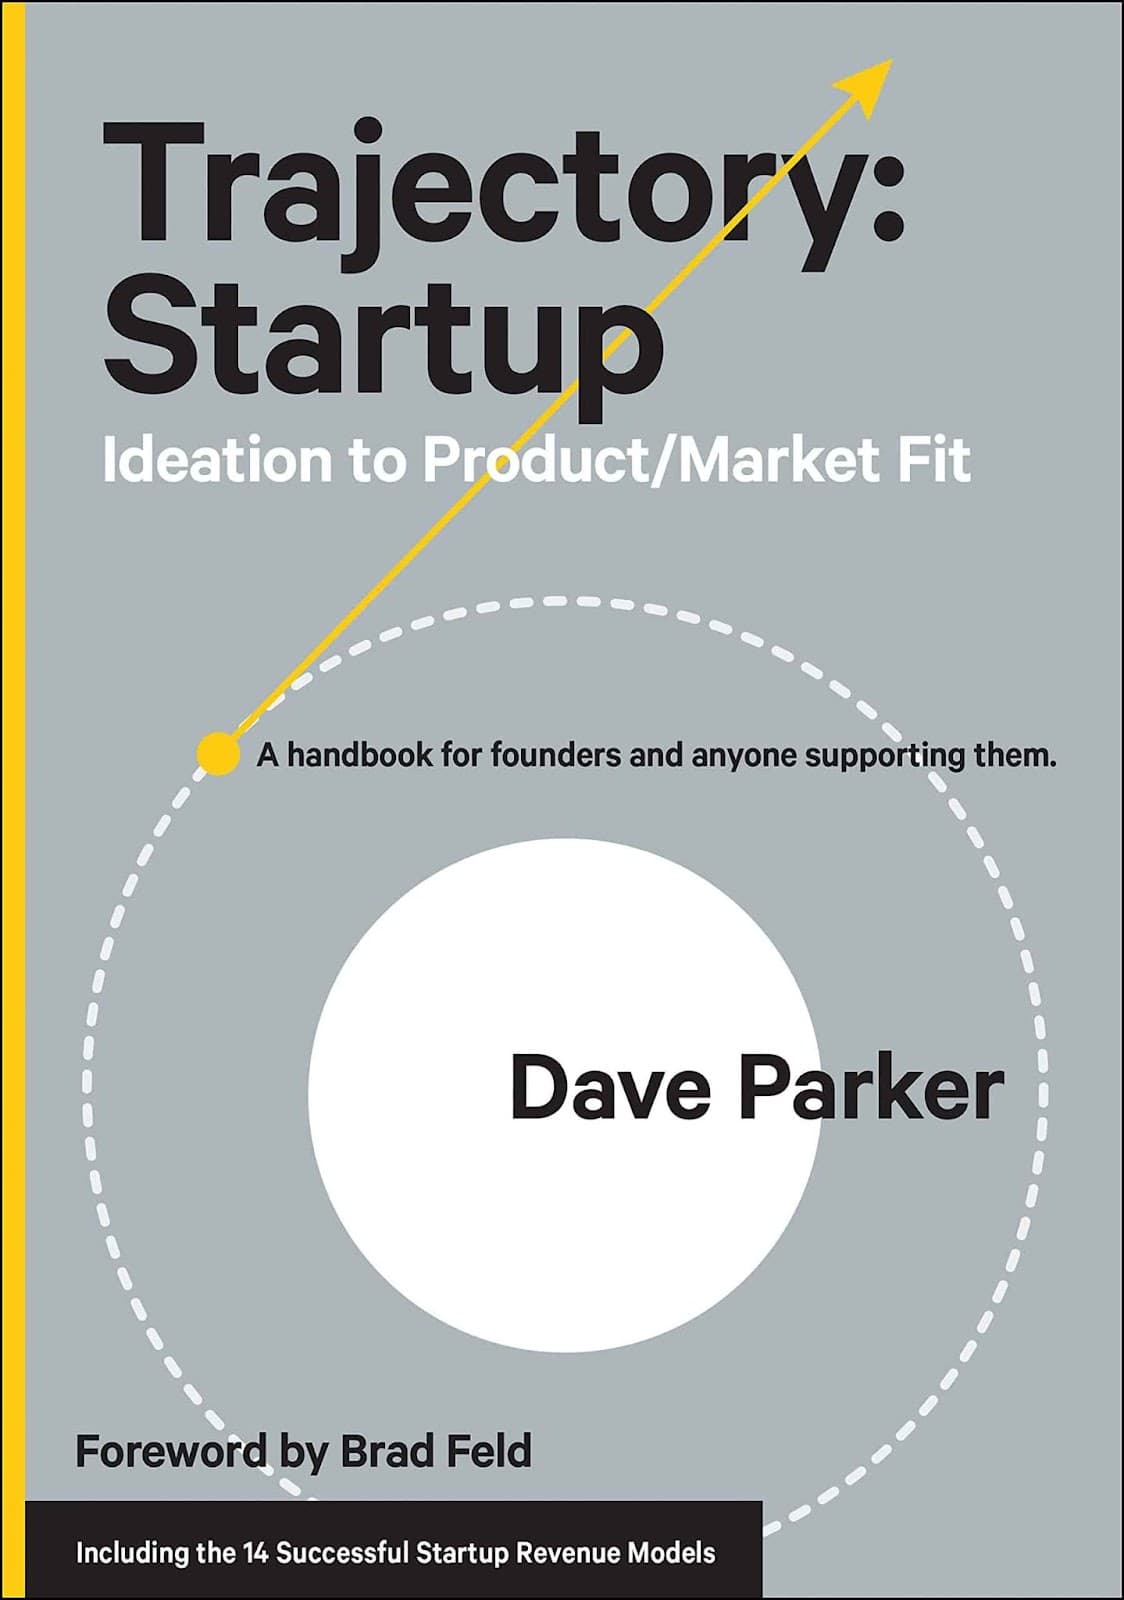 Front cover image of Trajectory Startup, one of the best business books to read.